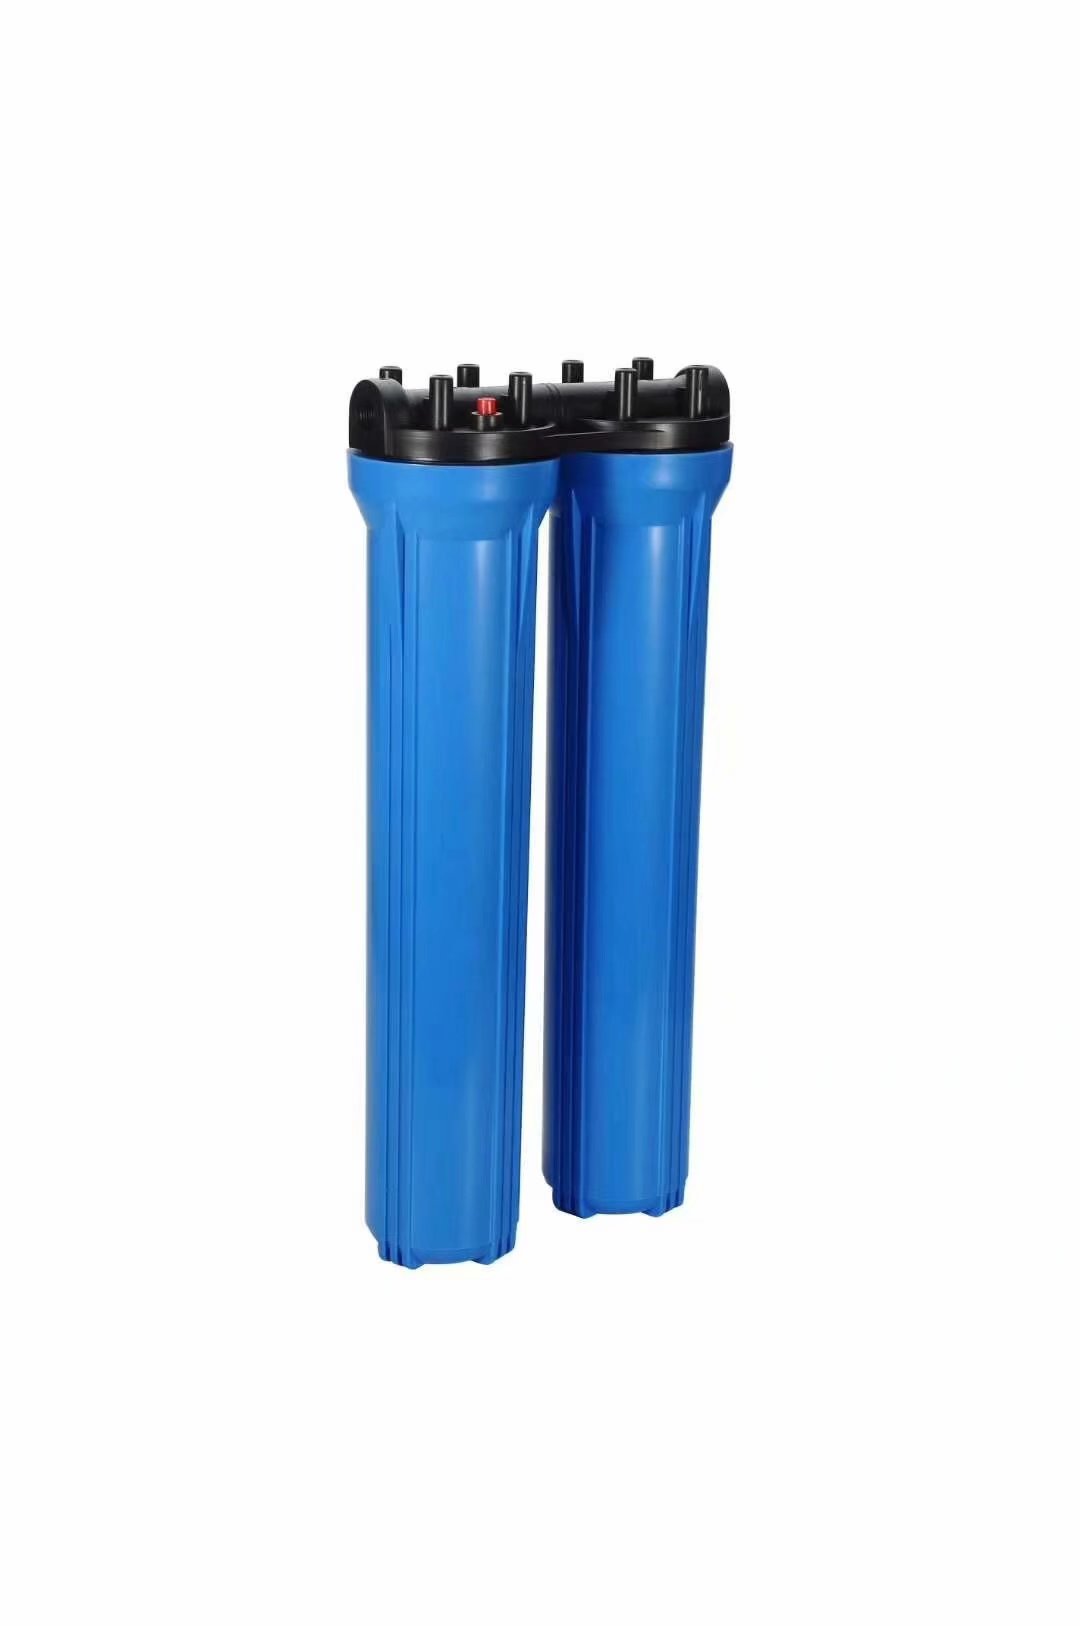 Commercial RO Water Purifier Plastic Blue Household Manual Purifying Water